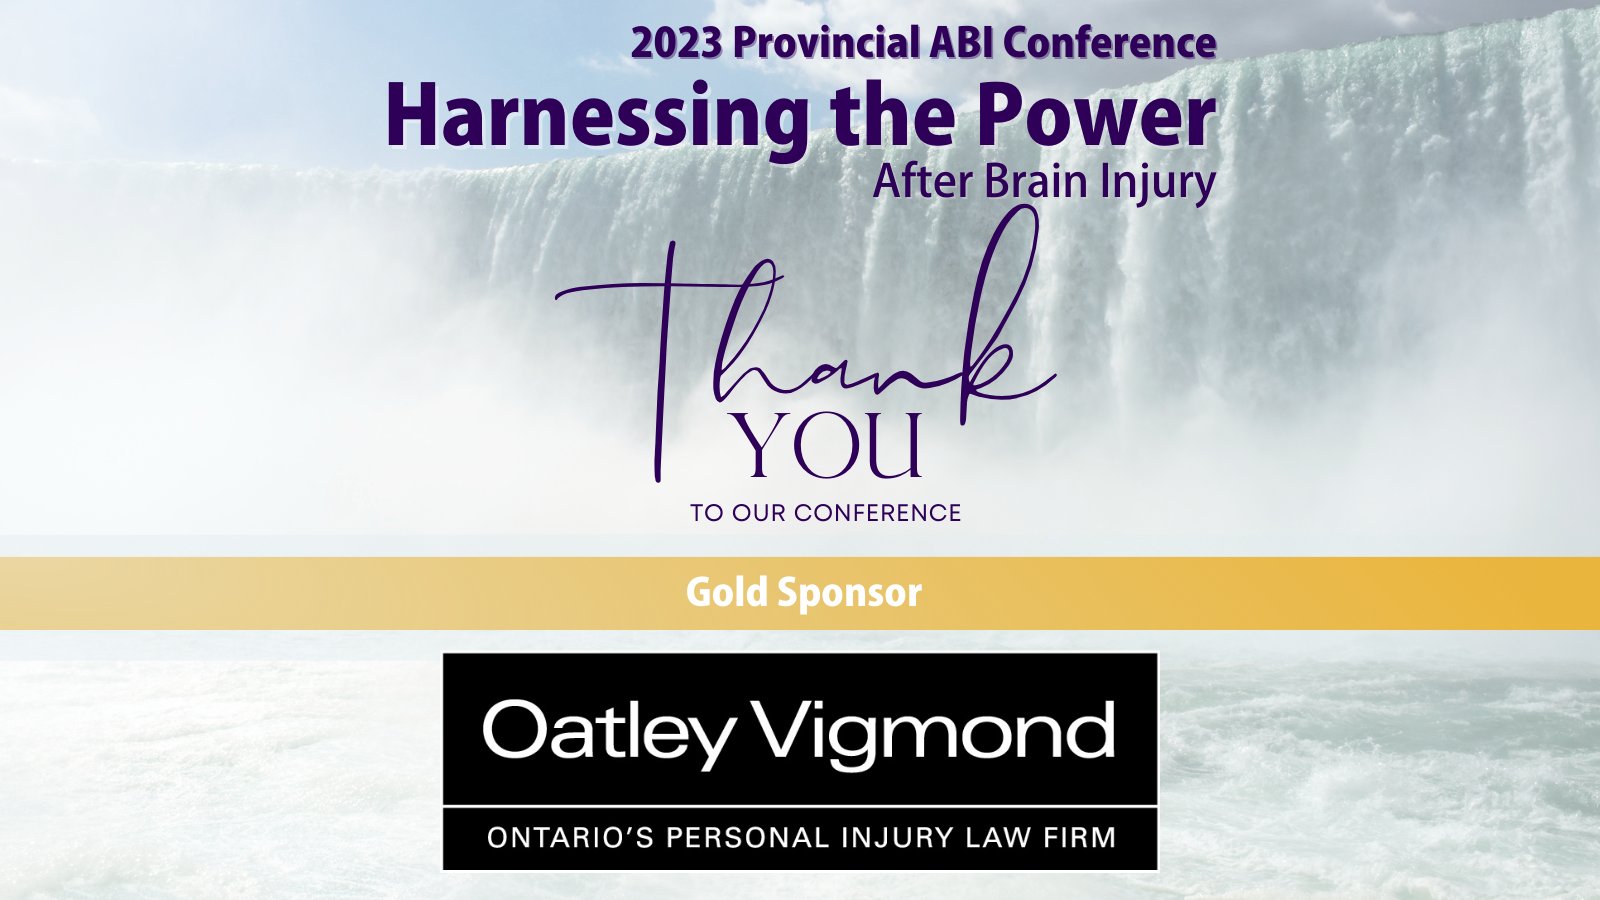 2023 Provincial ABI Conference: Harnessing the Power After Brain Injury